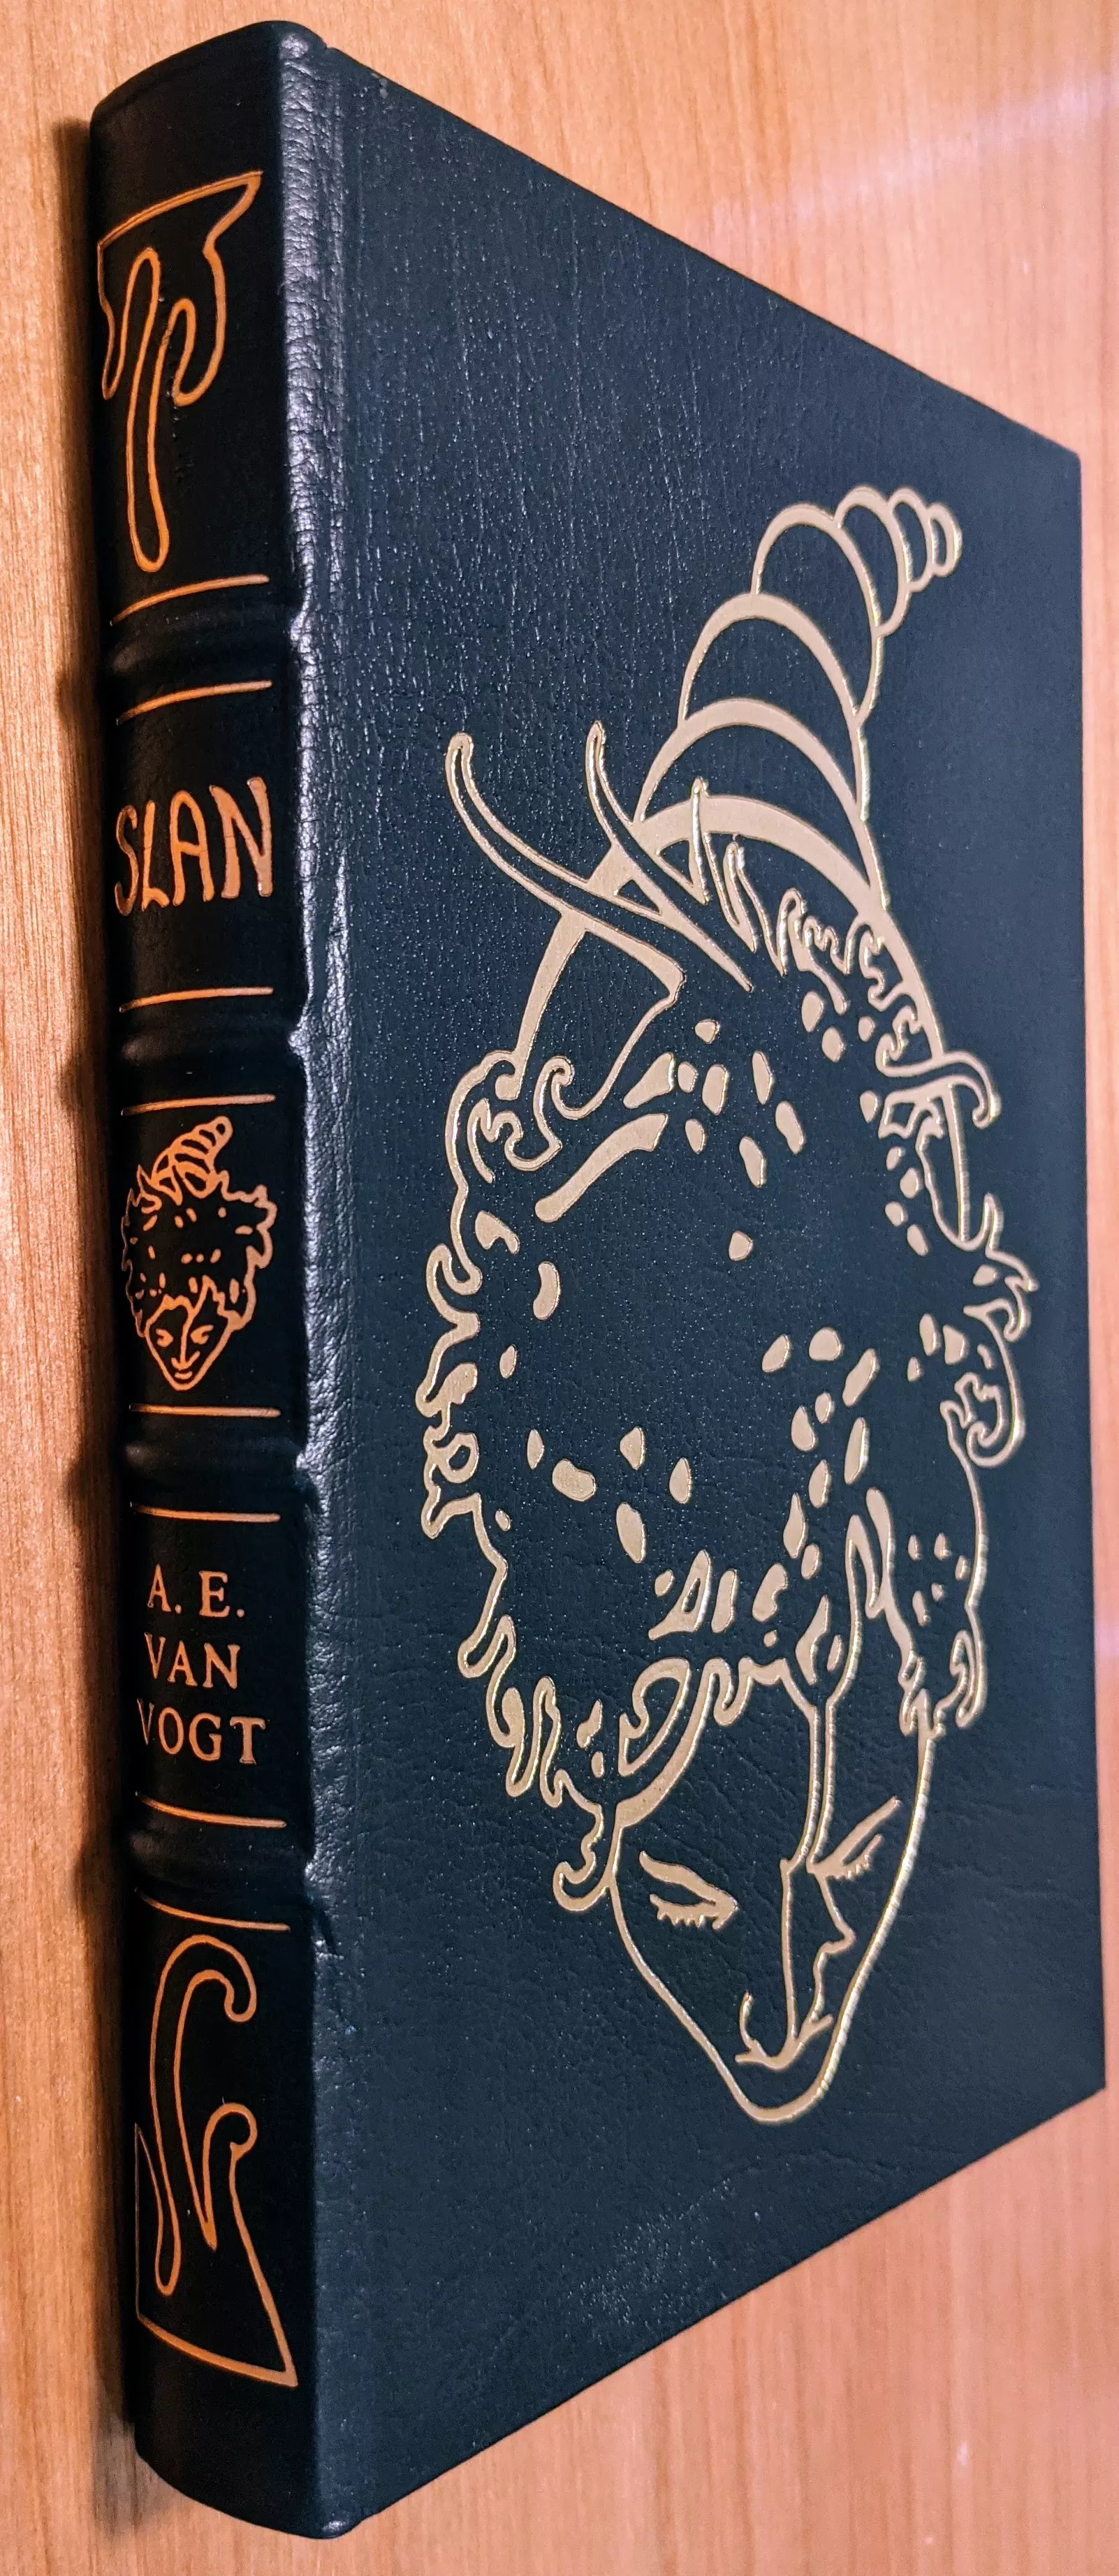 Stunning Dark Navy Blue Leather Bound hardback book with hubbed spine, cover artwork in 22kt gold, printed on archival paper with gold gilded edges, smyth sewing & concealed muslin joints
	  - original artwork by Richard Powers